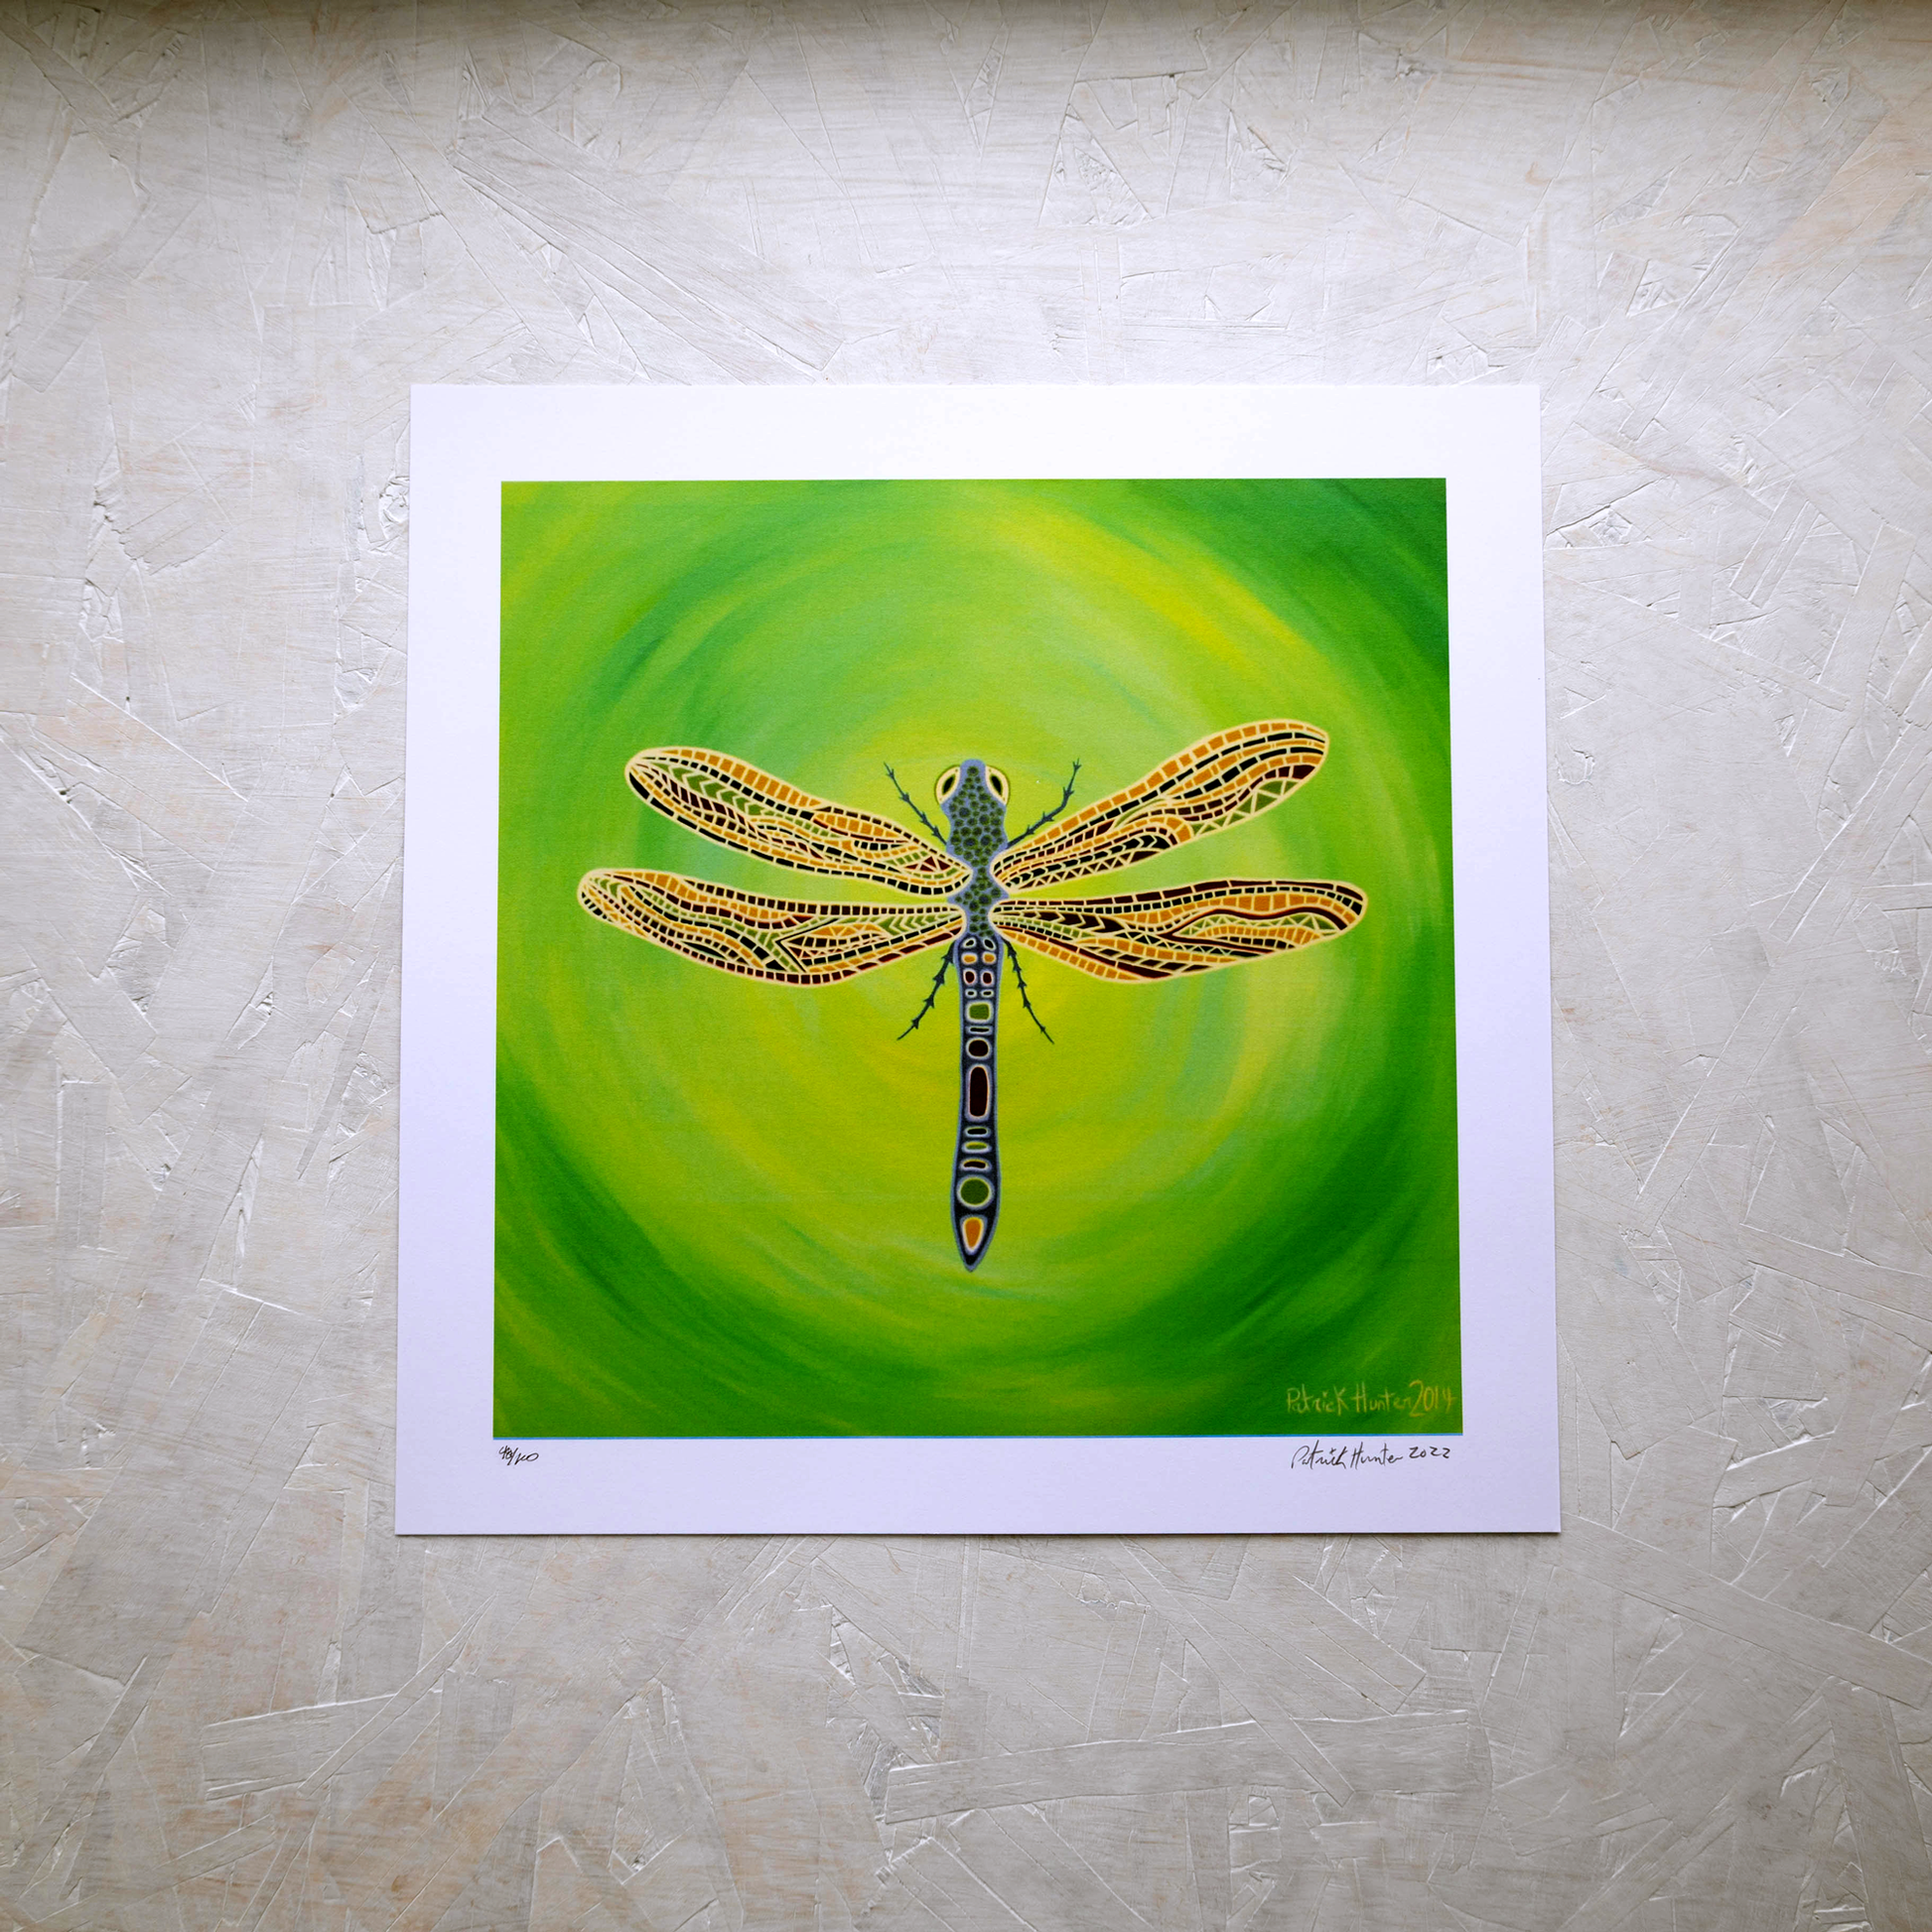 Print of Patrick Hunter's painting of a dragonfly against green background in woodland art style.